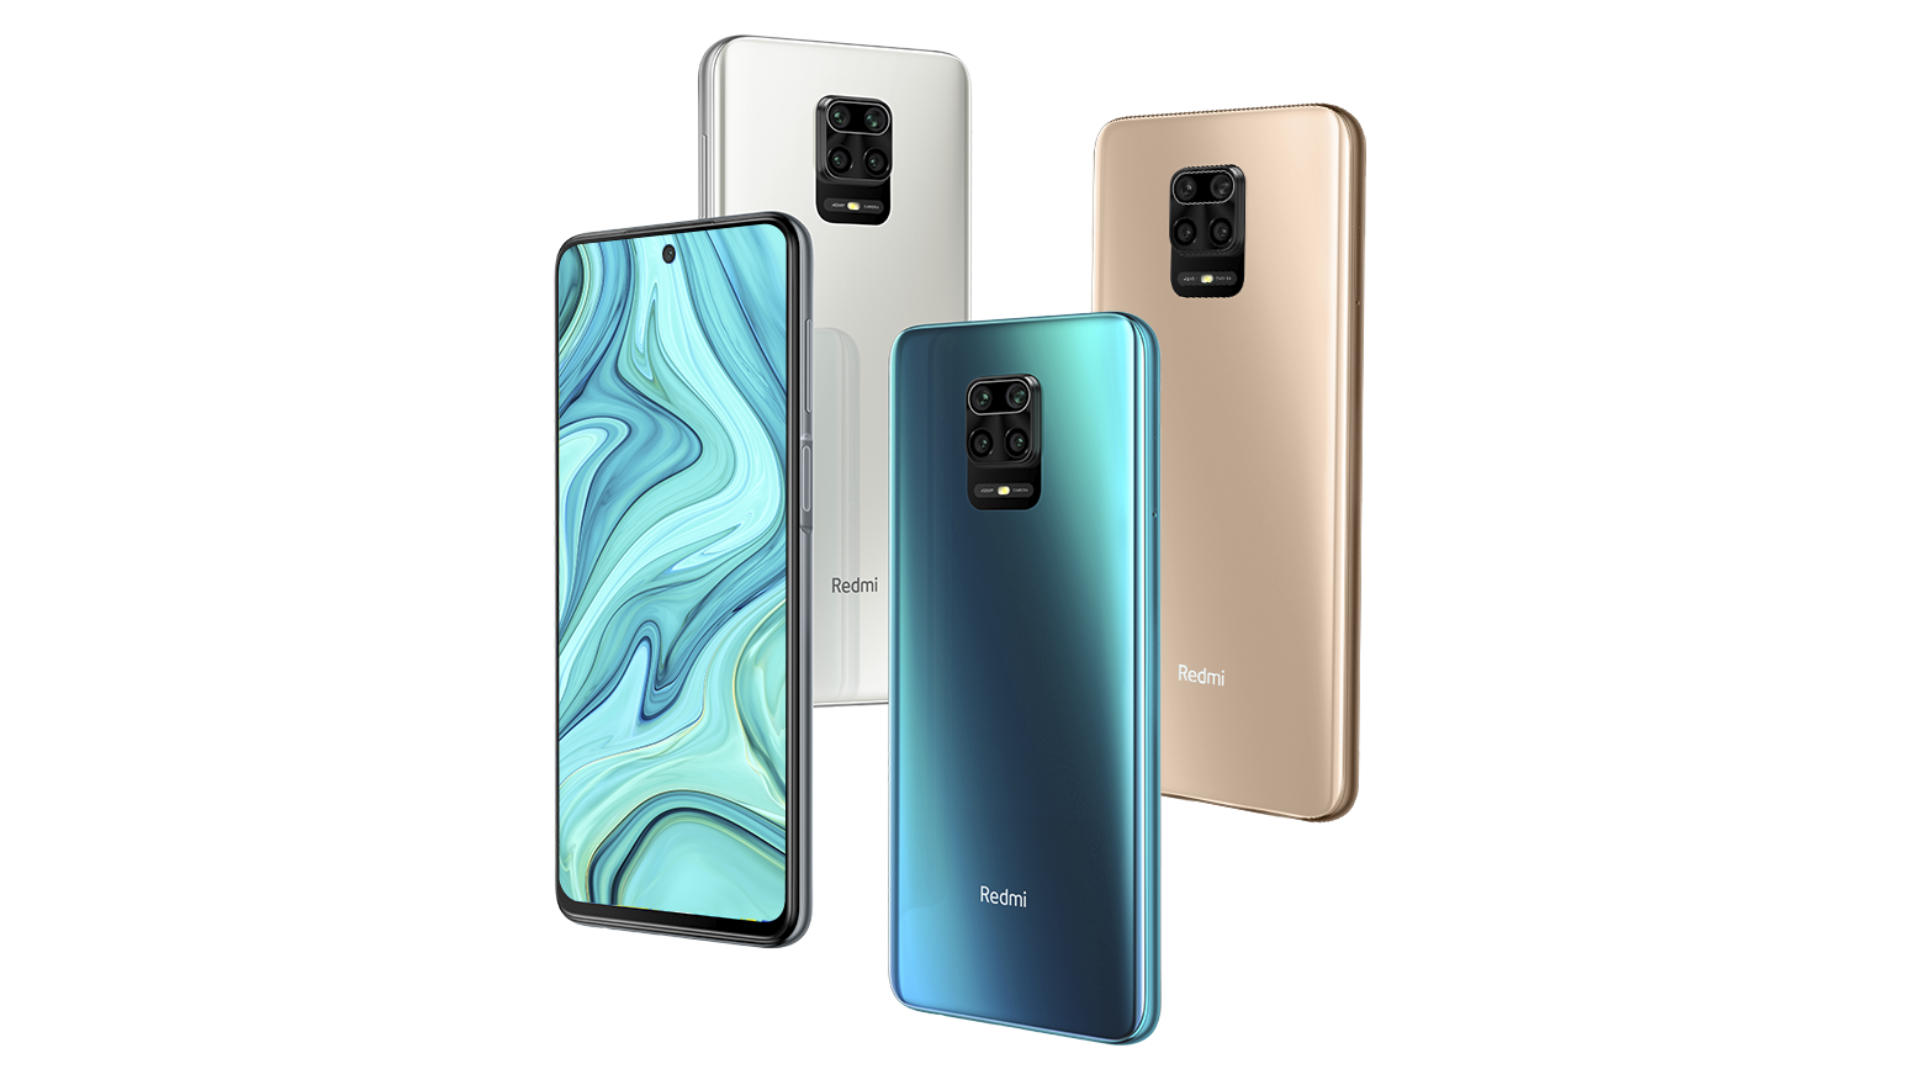 Another?  Xiaomi launches Redmi Note 10 Lite with quad camera and SD 720G – Mobile – Tecnoblog